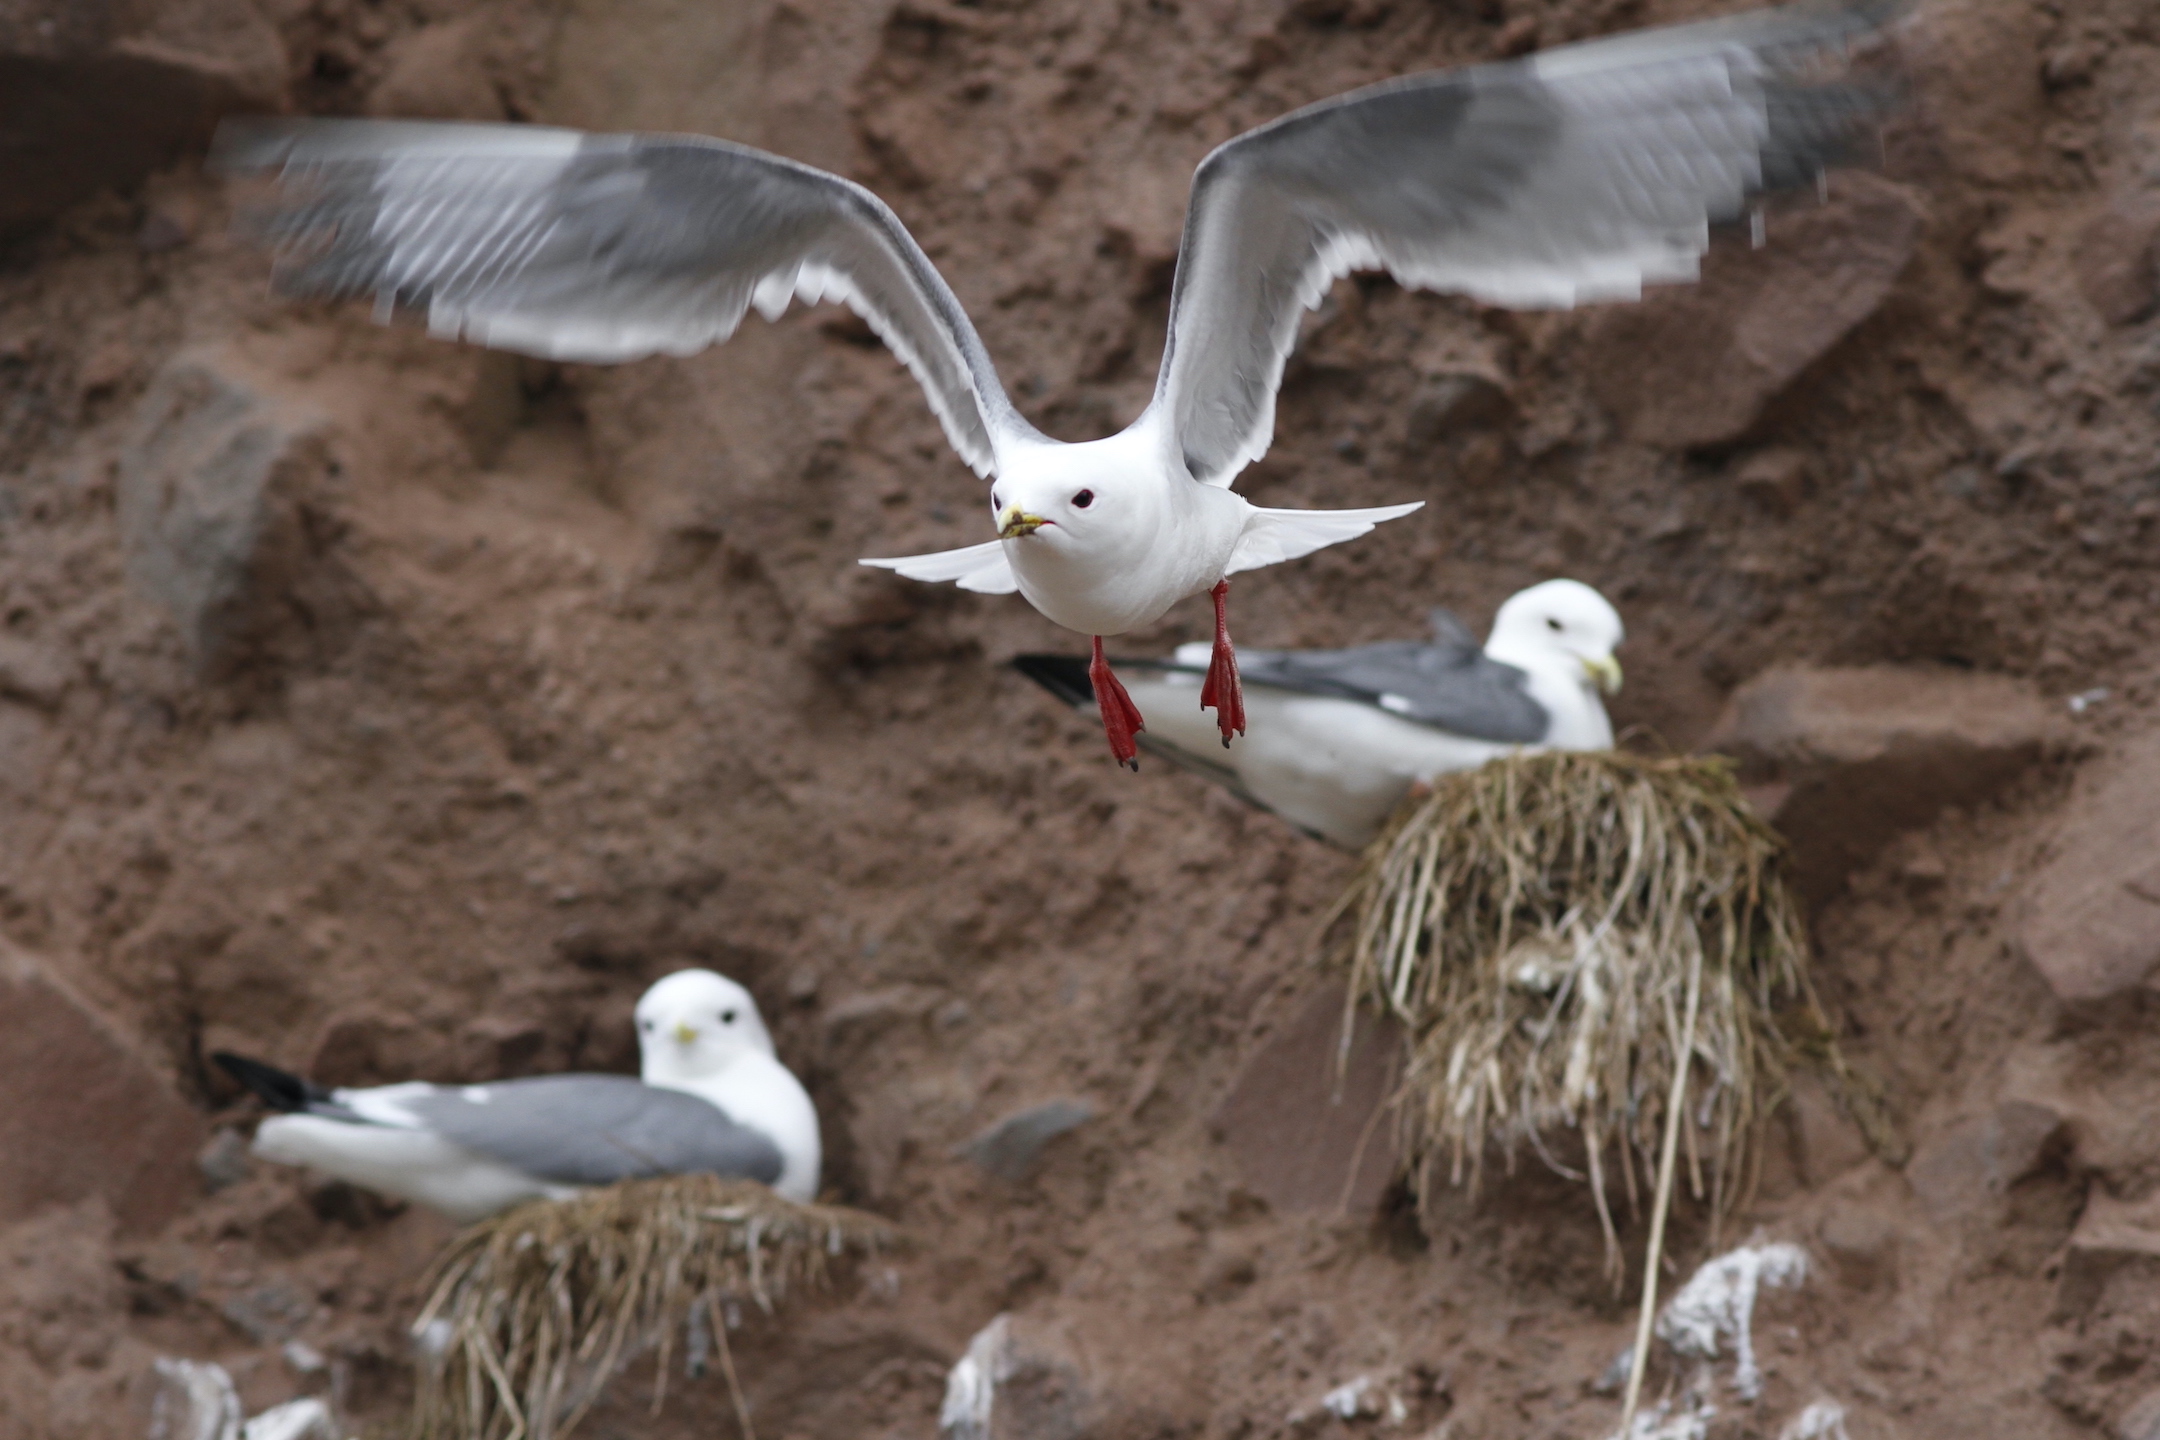 A white bird with a yellow beak and bright red legs flies in front of a brown cliff made of rock and soil. Two similar birds sit on grassy nests built on the cliff.